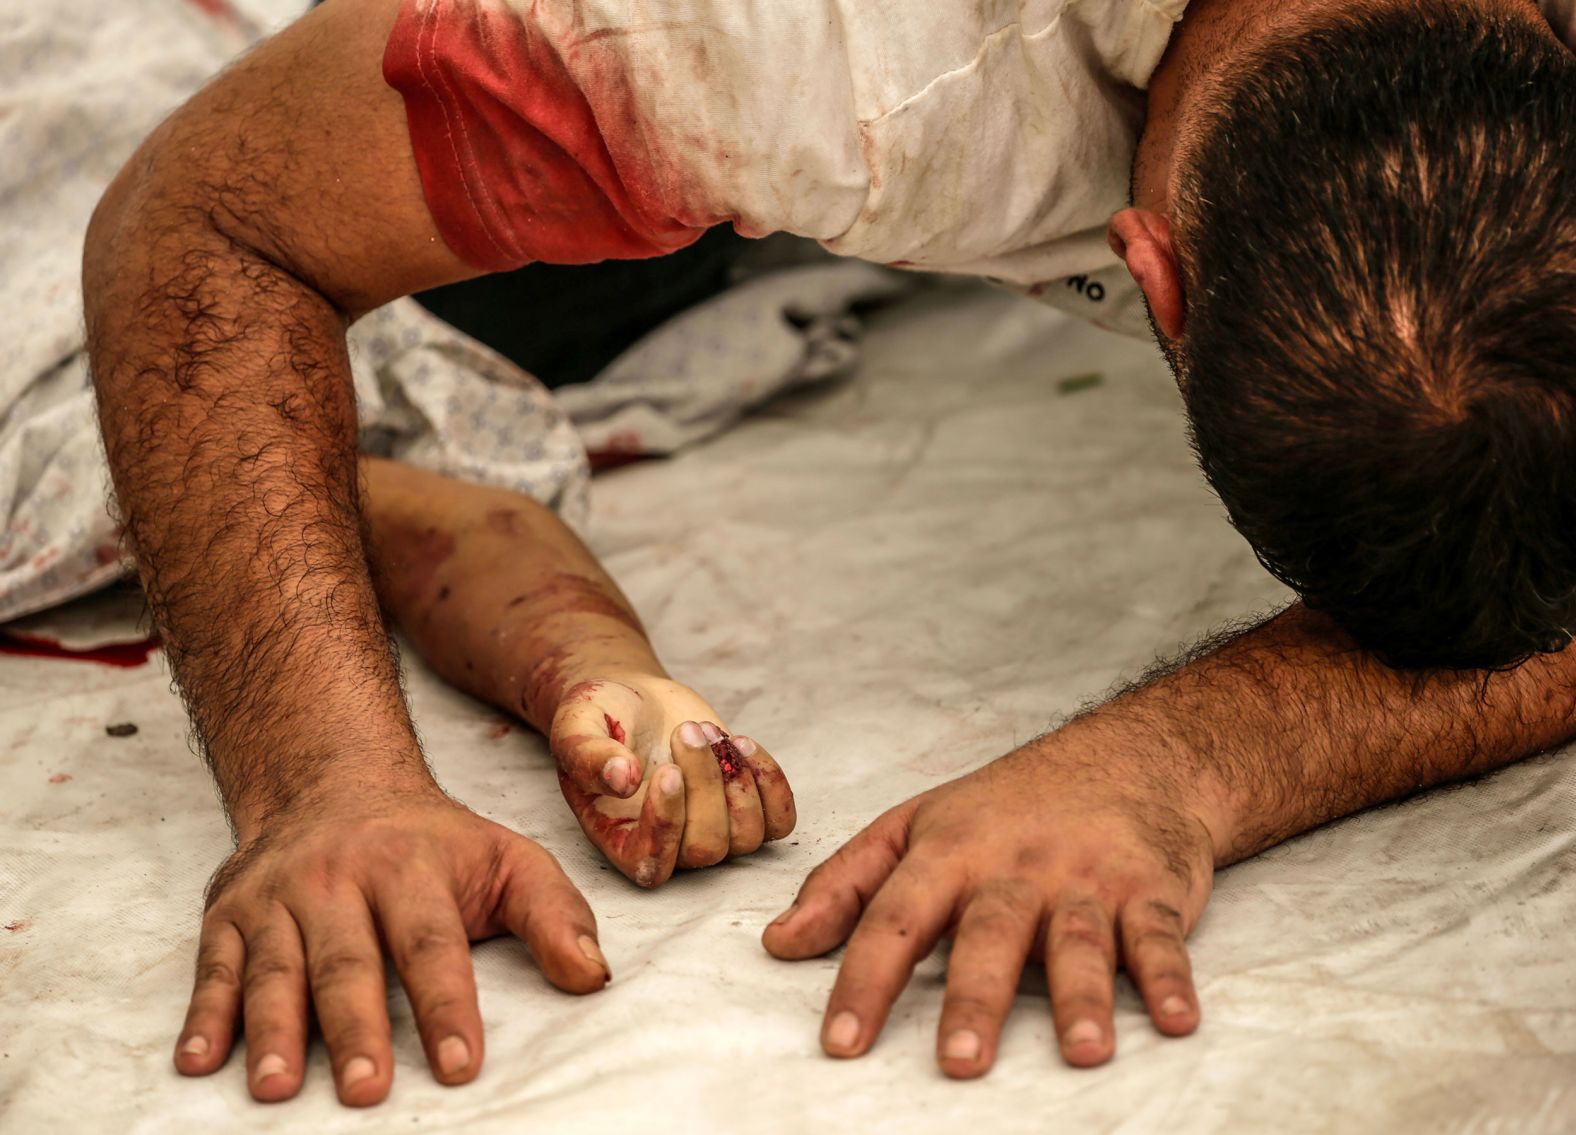 A Palestinian man mourns over the body of his nephew killed in an Israeli airstrike in Gaza City on Monday, October 9.